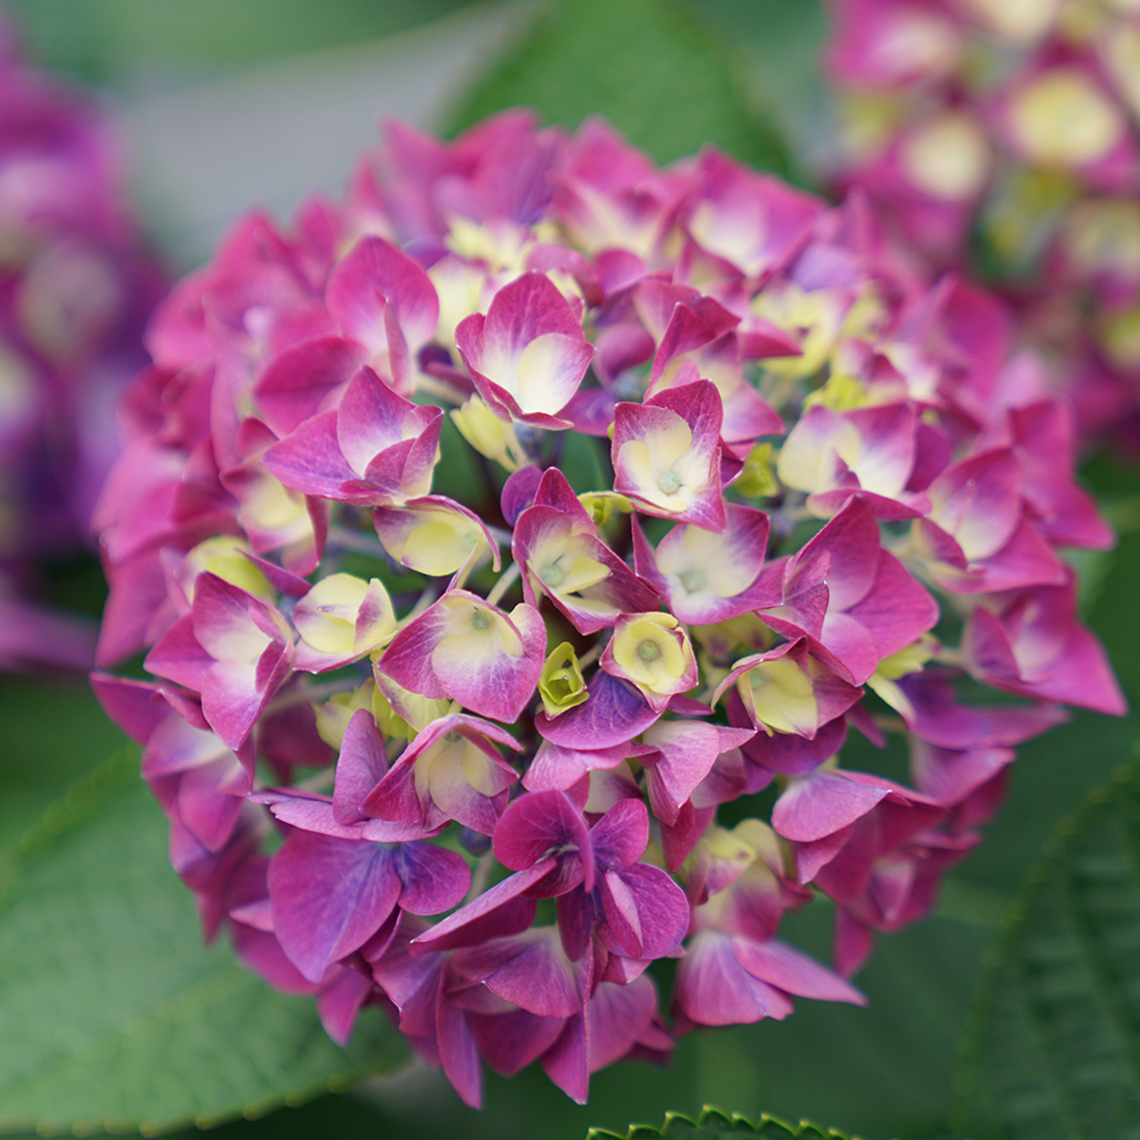 A single bloom of Wee Bit Giddy hydrangea with purple coloration